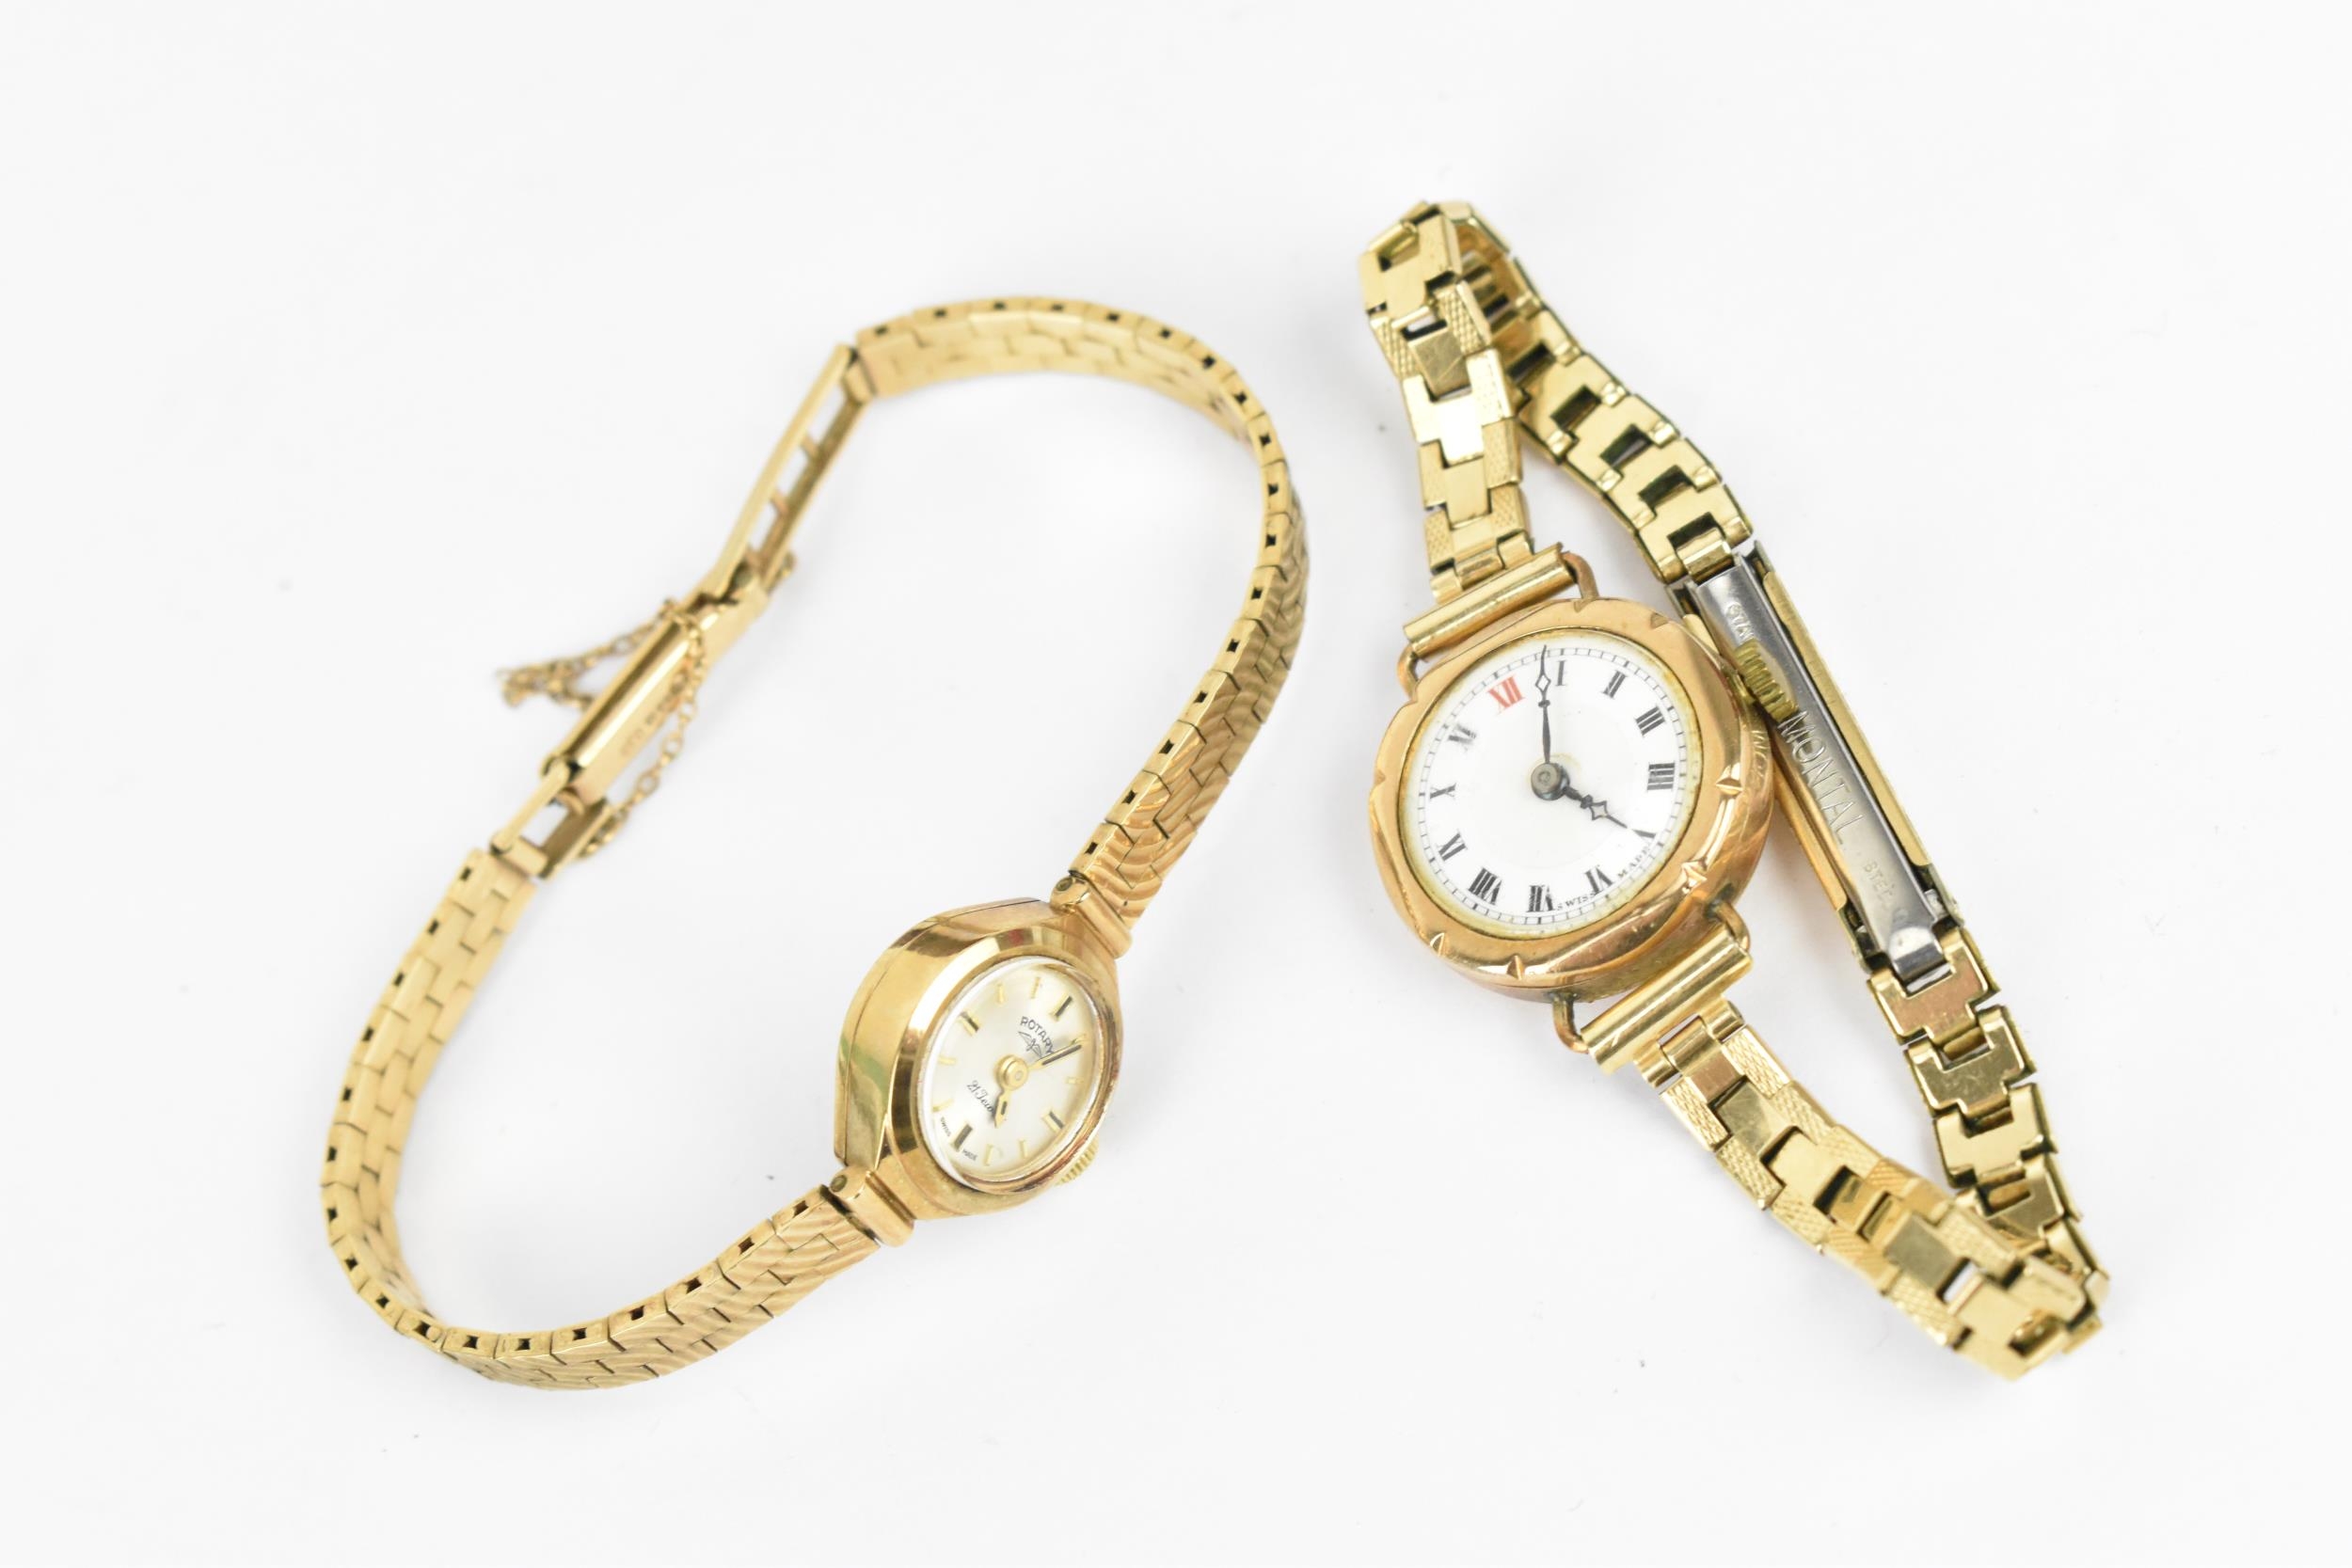 Two manual wind, ladies 9ct gold wrist watches to include a Rotary watch having a silvered dial with - Image 2 of 3